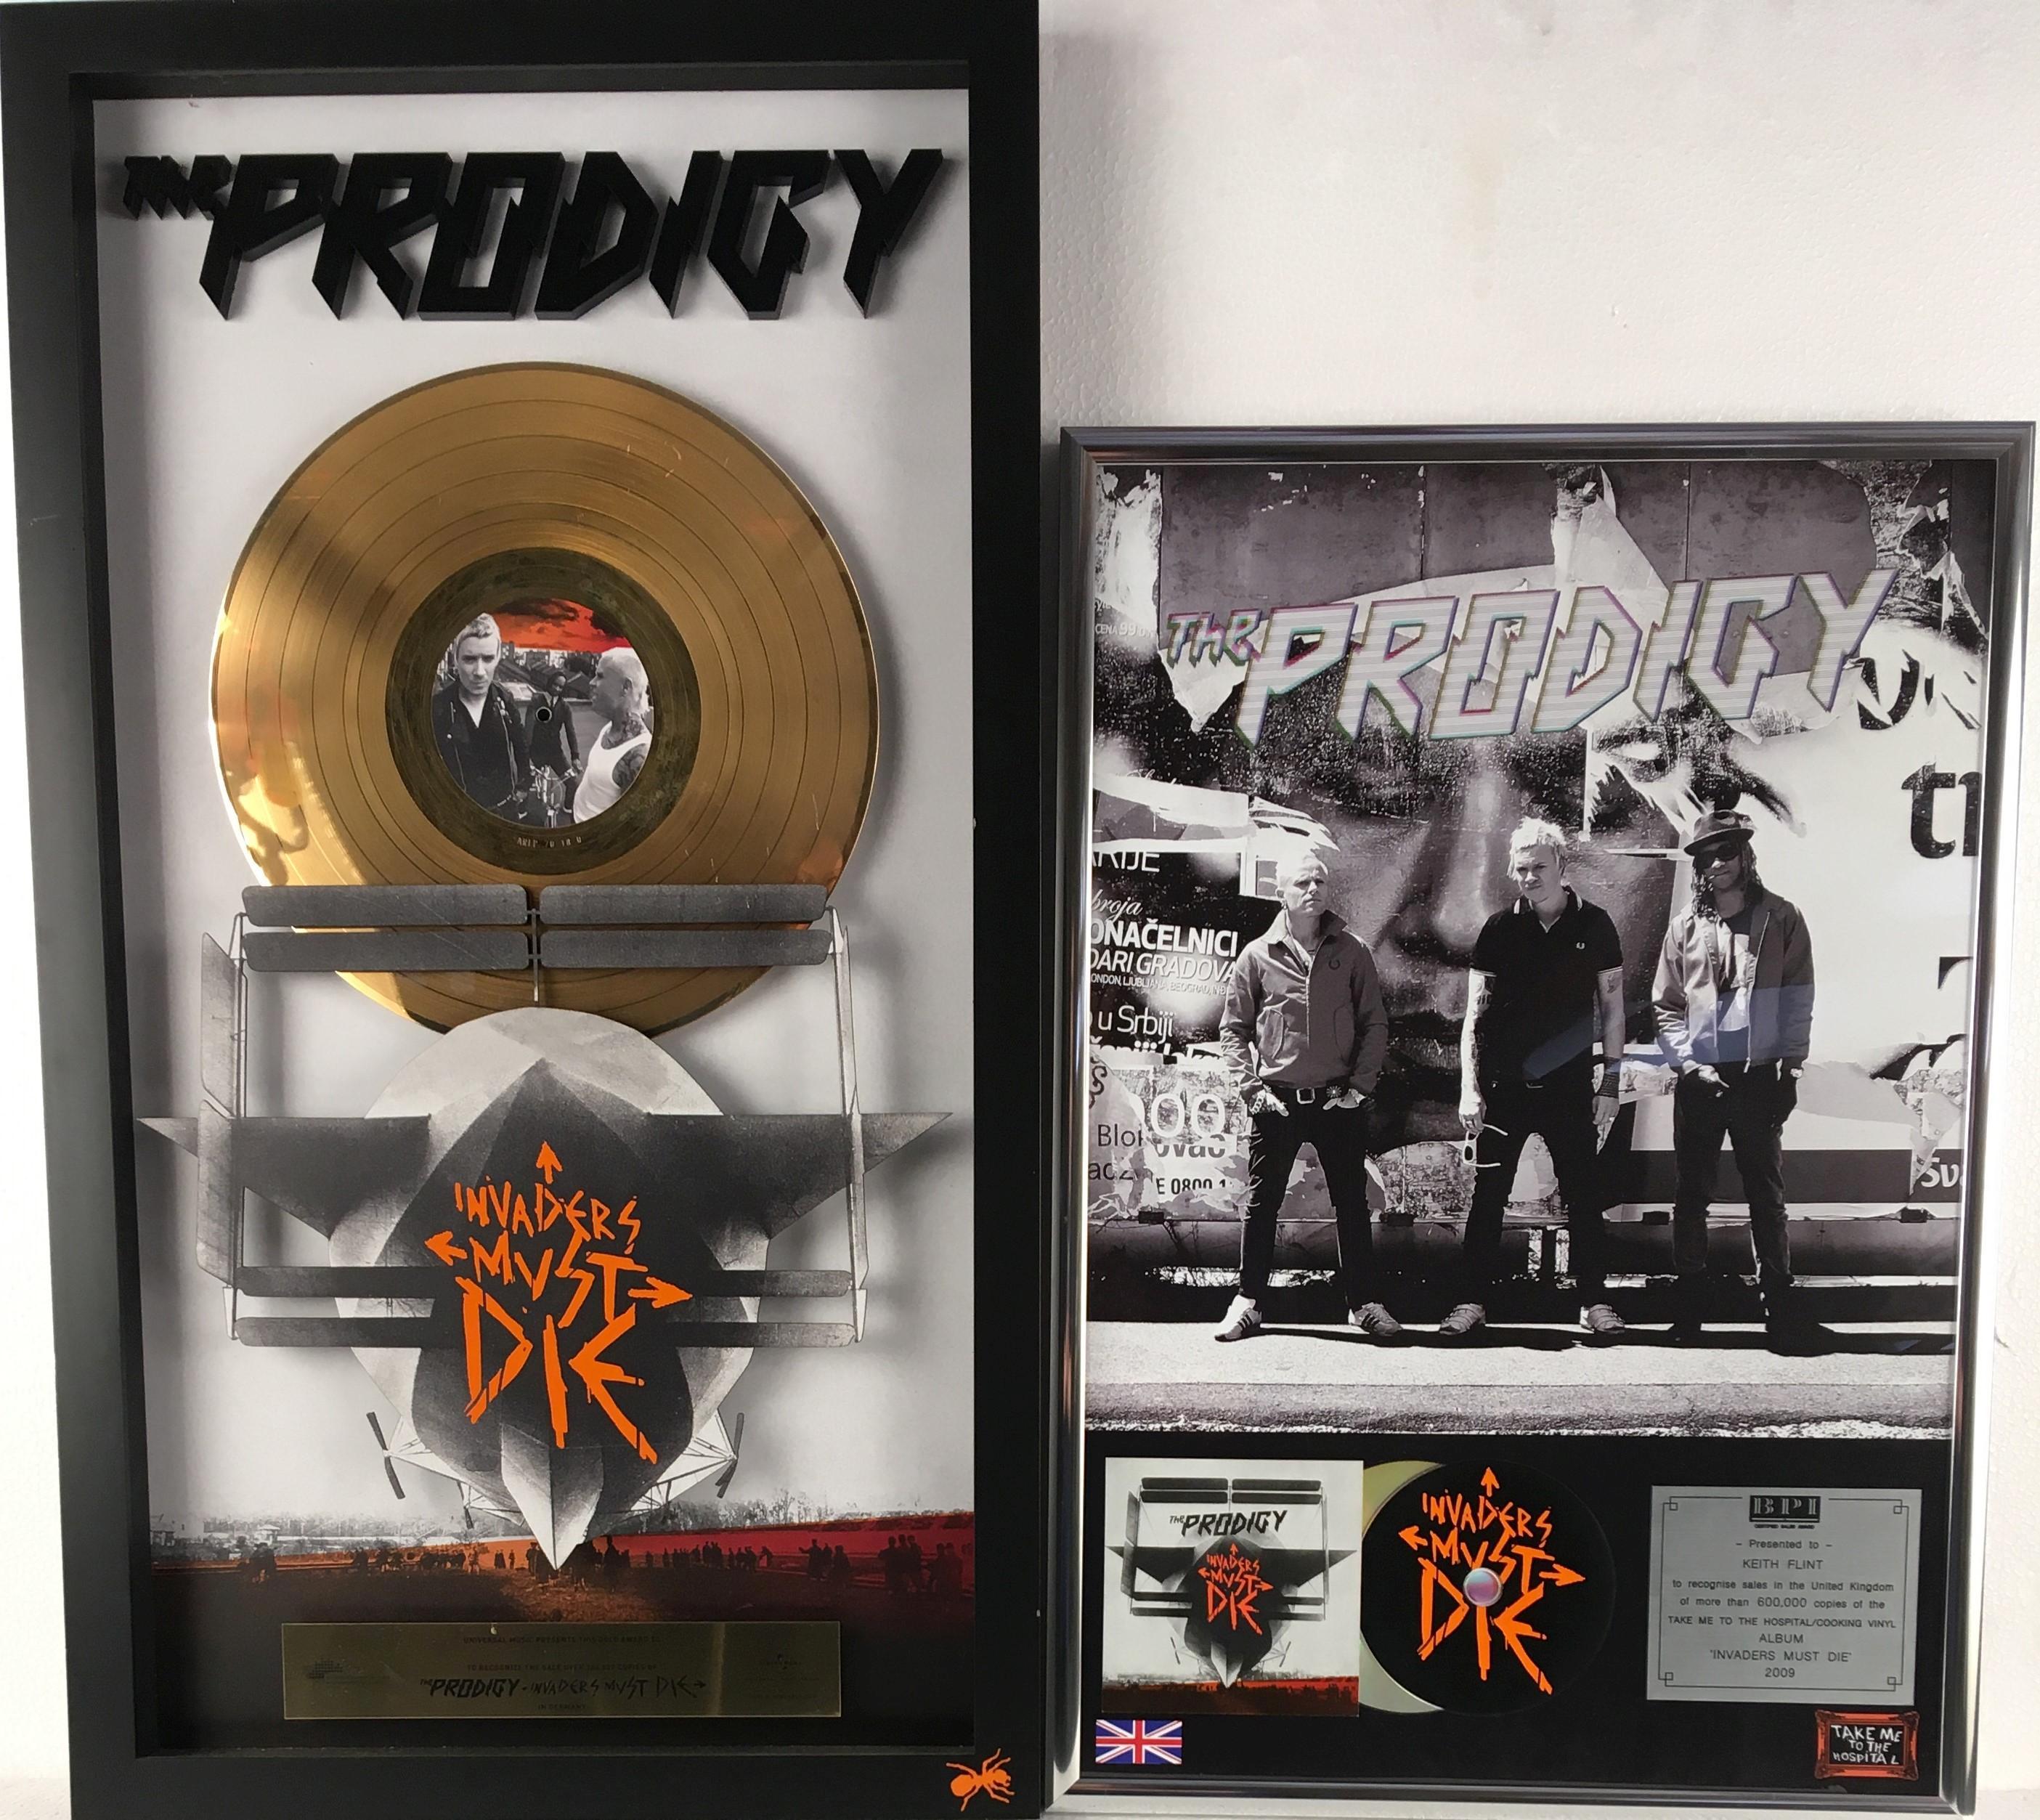 Invaders Must Die' 2009 a presentation gold disc to Keith Flint, to recognise sales in Germany of - Image 2 of 4